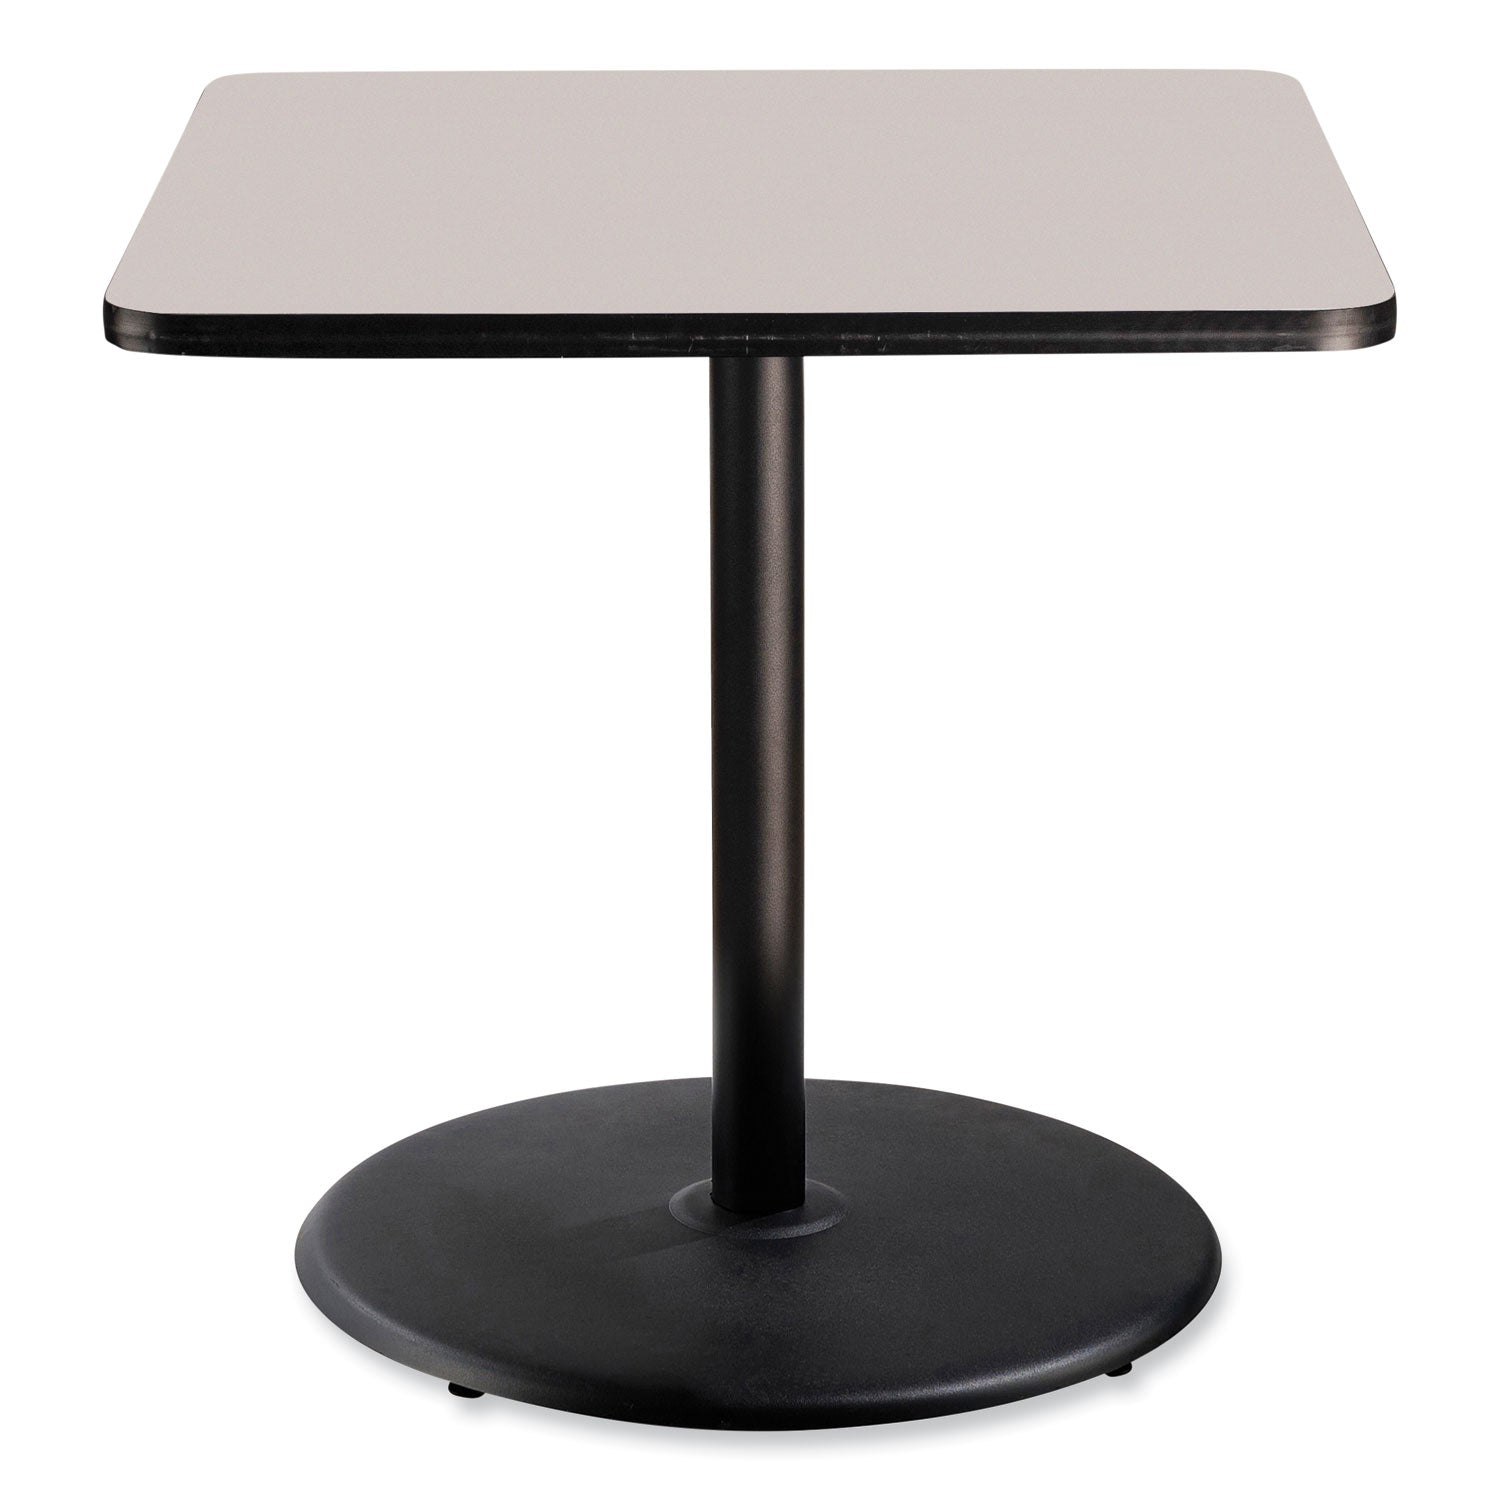 cafe-table-36w-x-36d-x-36h-square-top-round-base-gray-nebula-top-black-base-ships-in-7-10-business-days_npsct33636rc1gy - 2